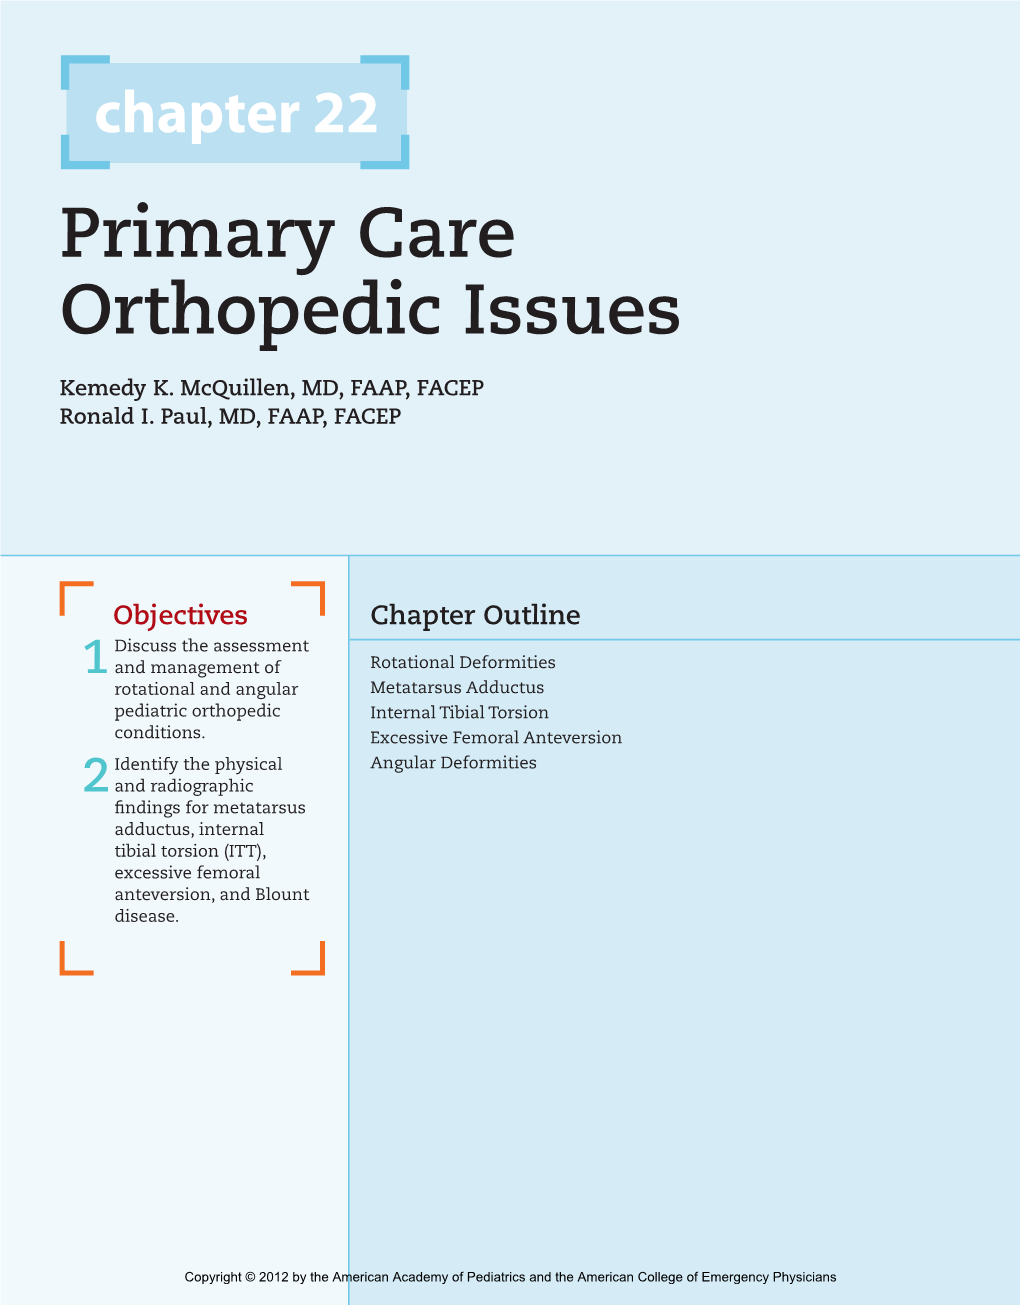 Primary Care Orthopedic Issues